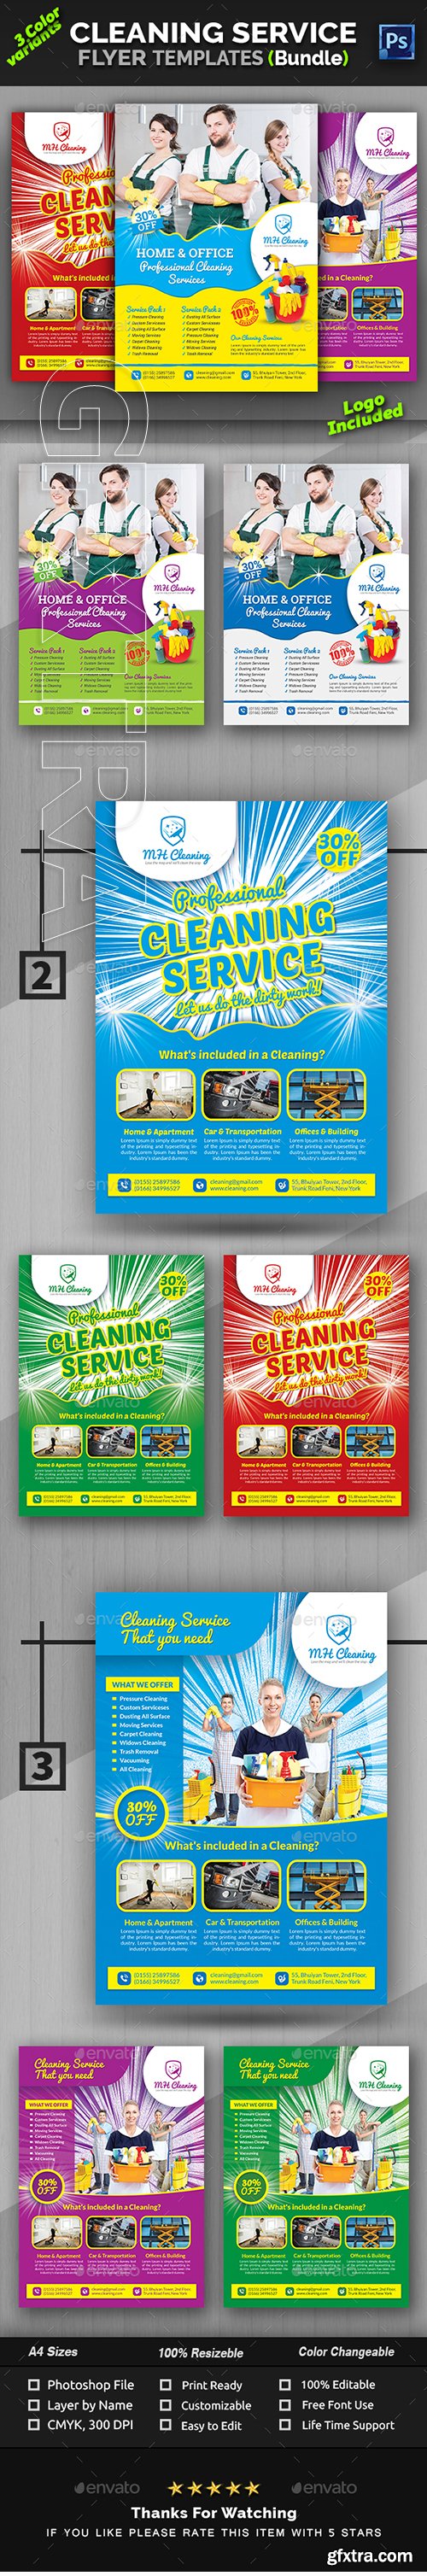 GraphicRiver - Cleaning Service Flyer Bundle 22542613